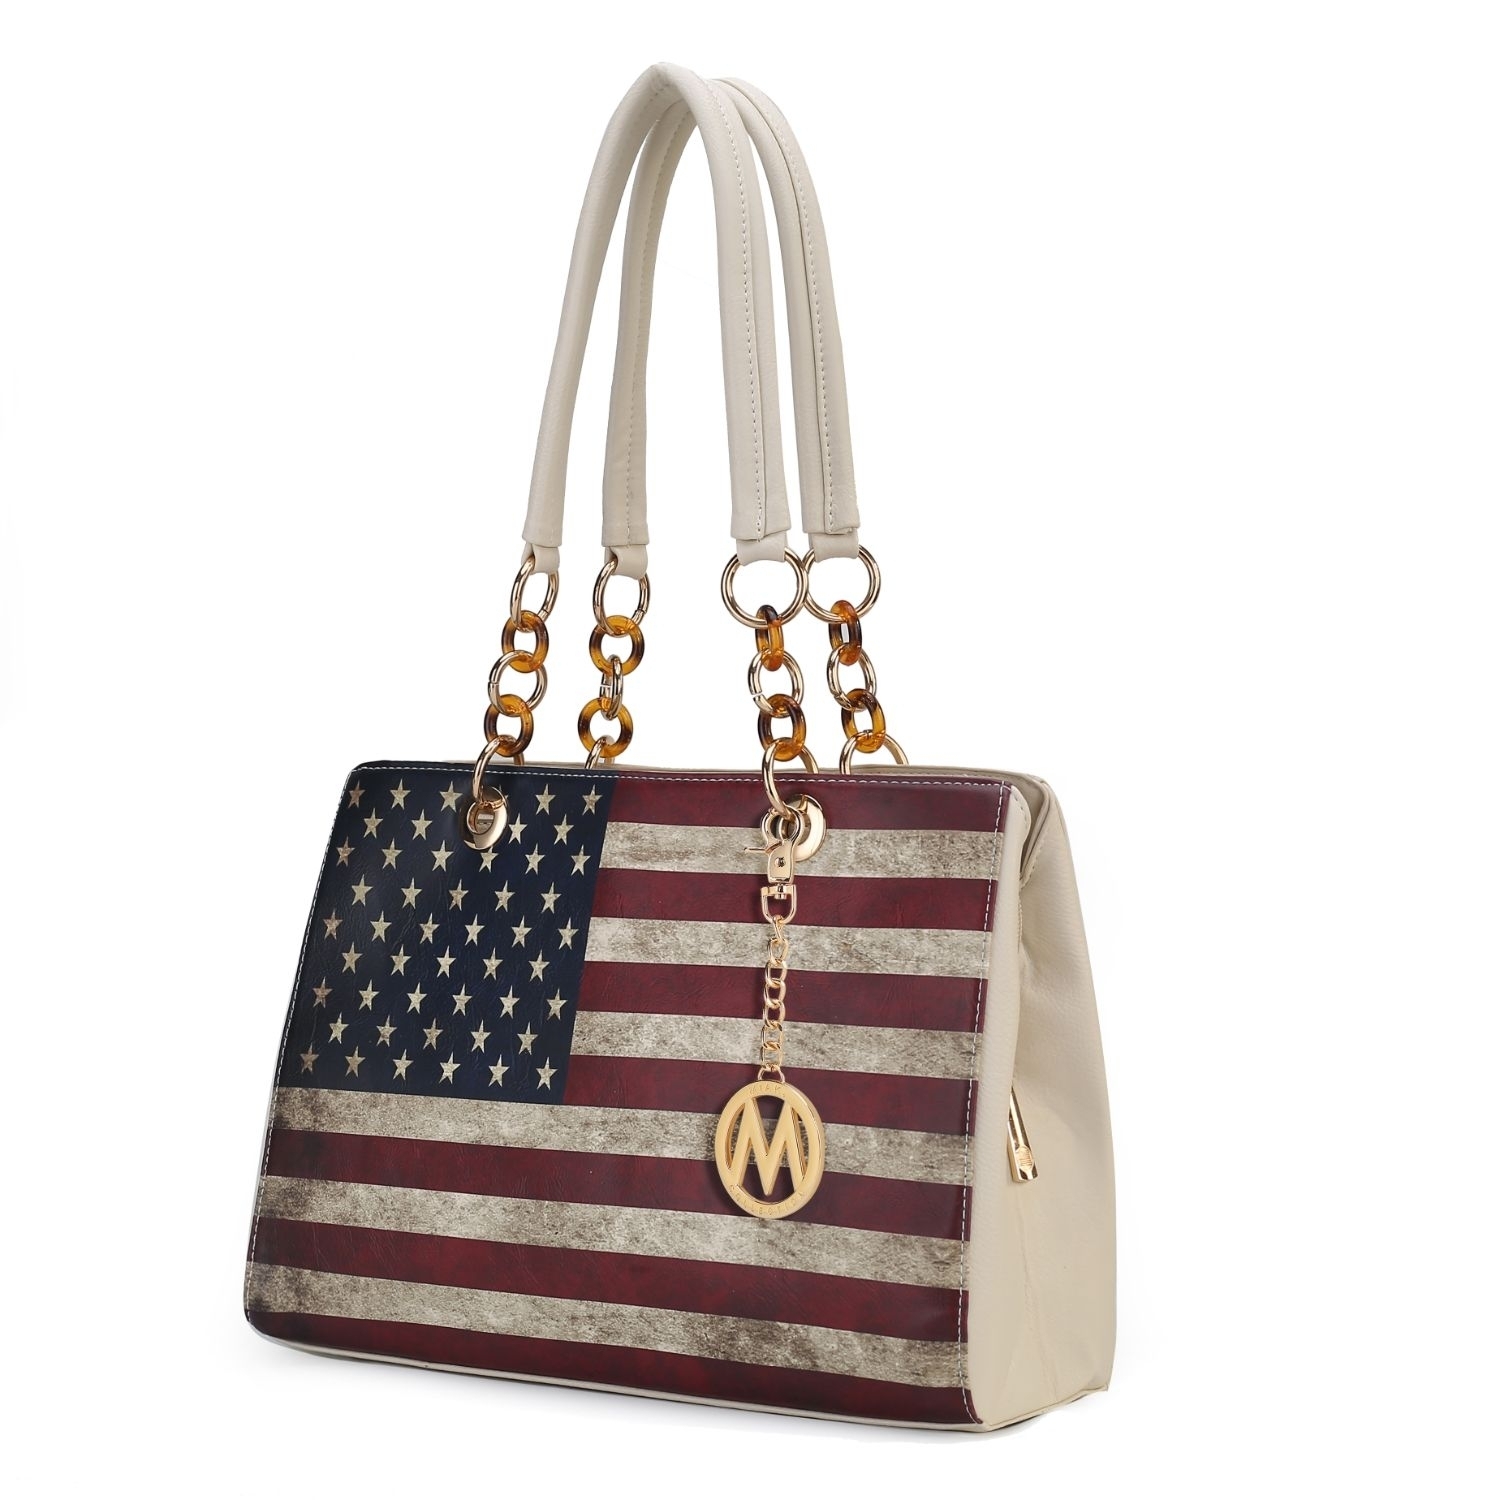 MKF Collection Nevaeh Vegan Leather Patriotic Pattern Women's Shoulder Bag By Mia K - Taupe